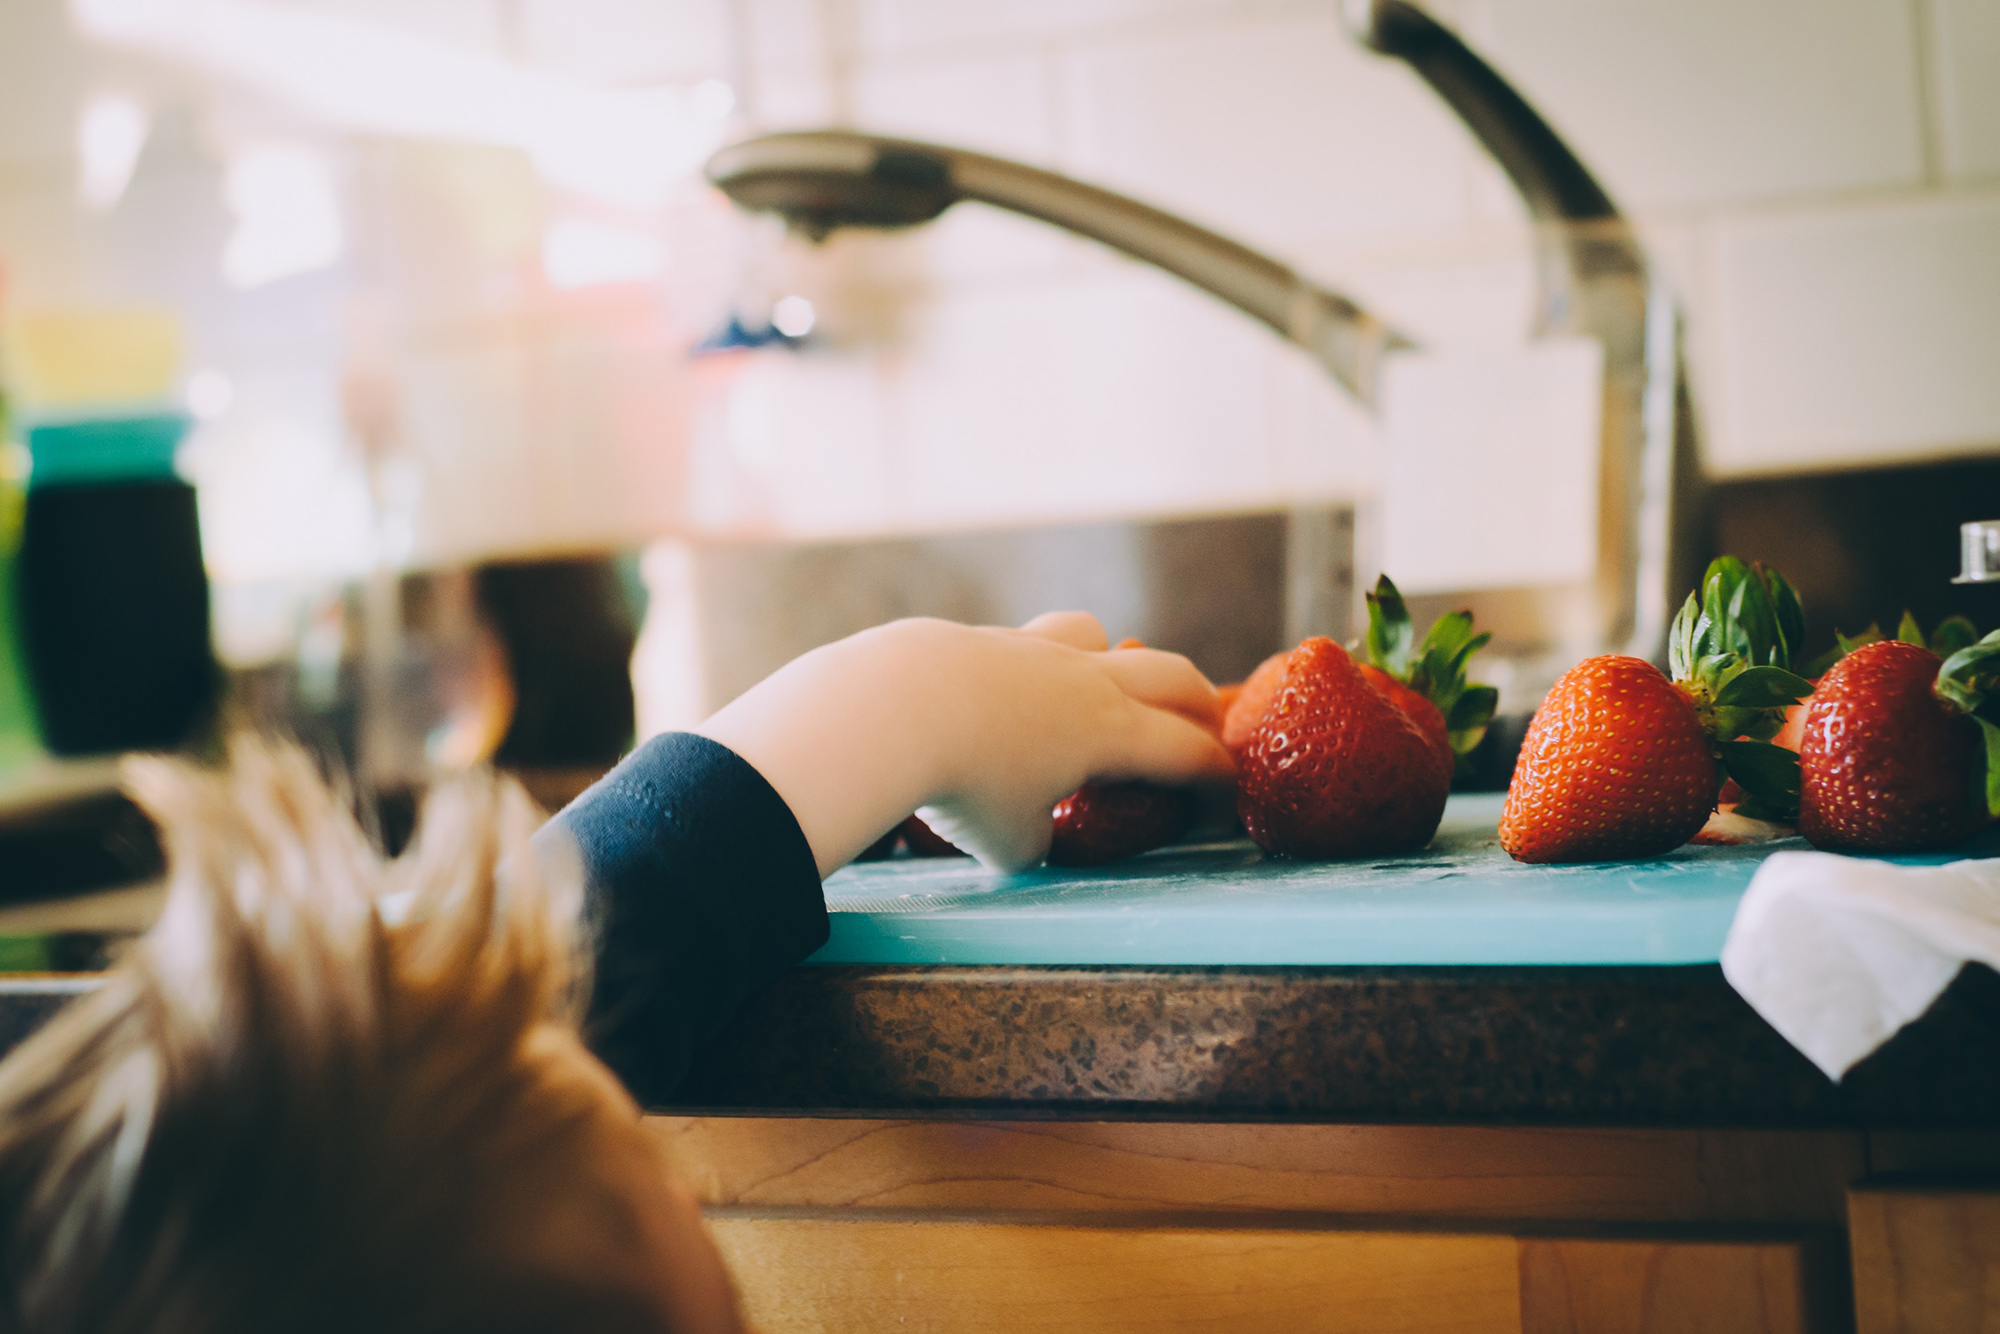 Little boy reaching up for strawberries in Kitchen